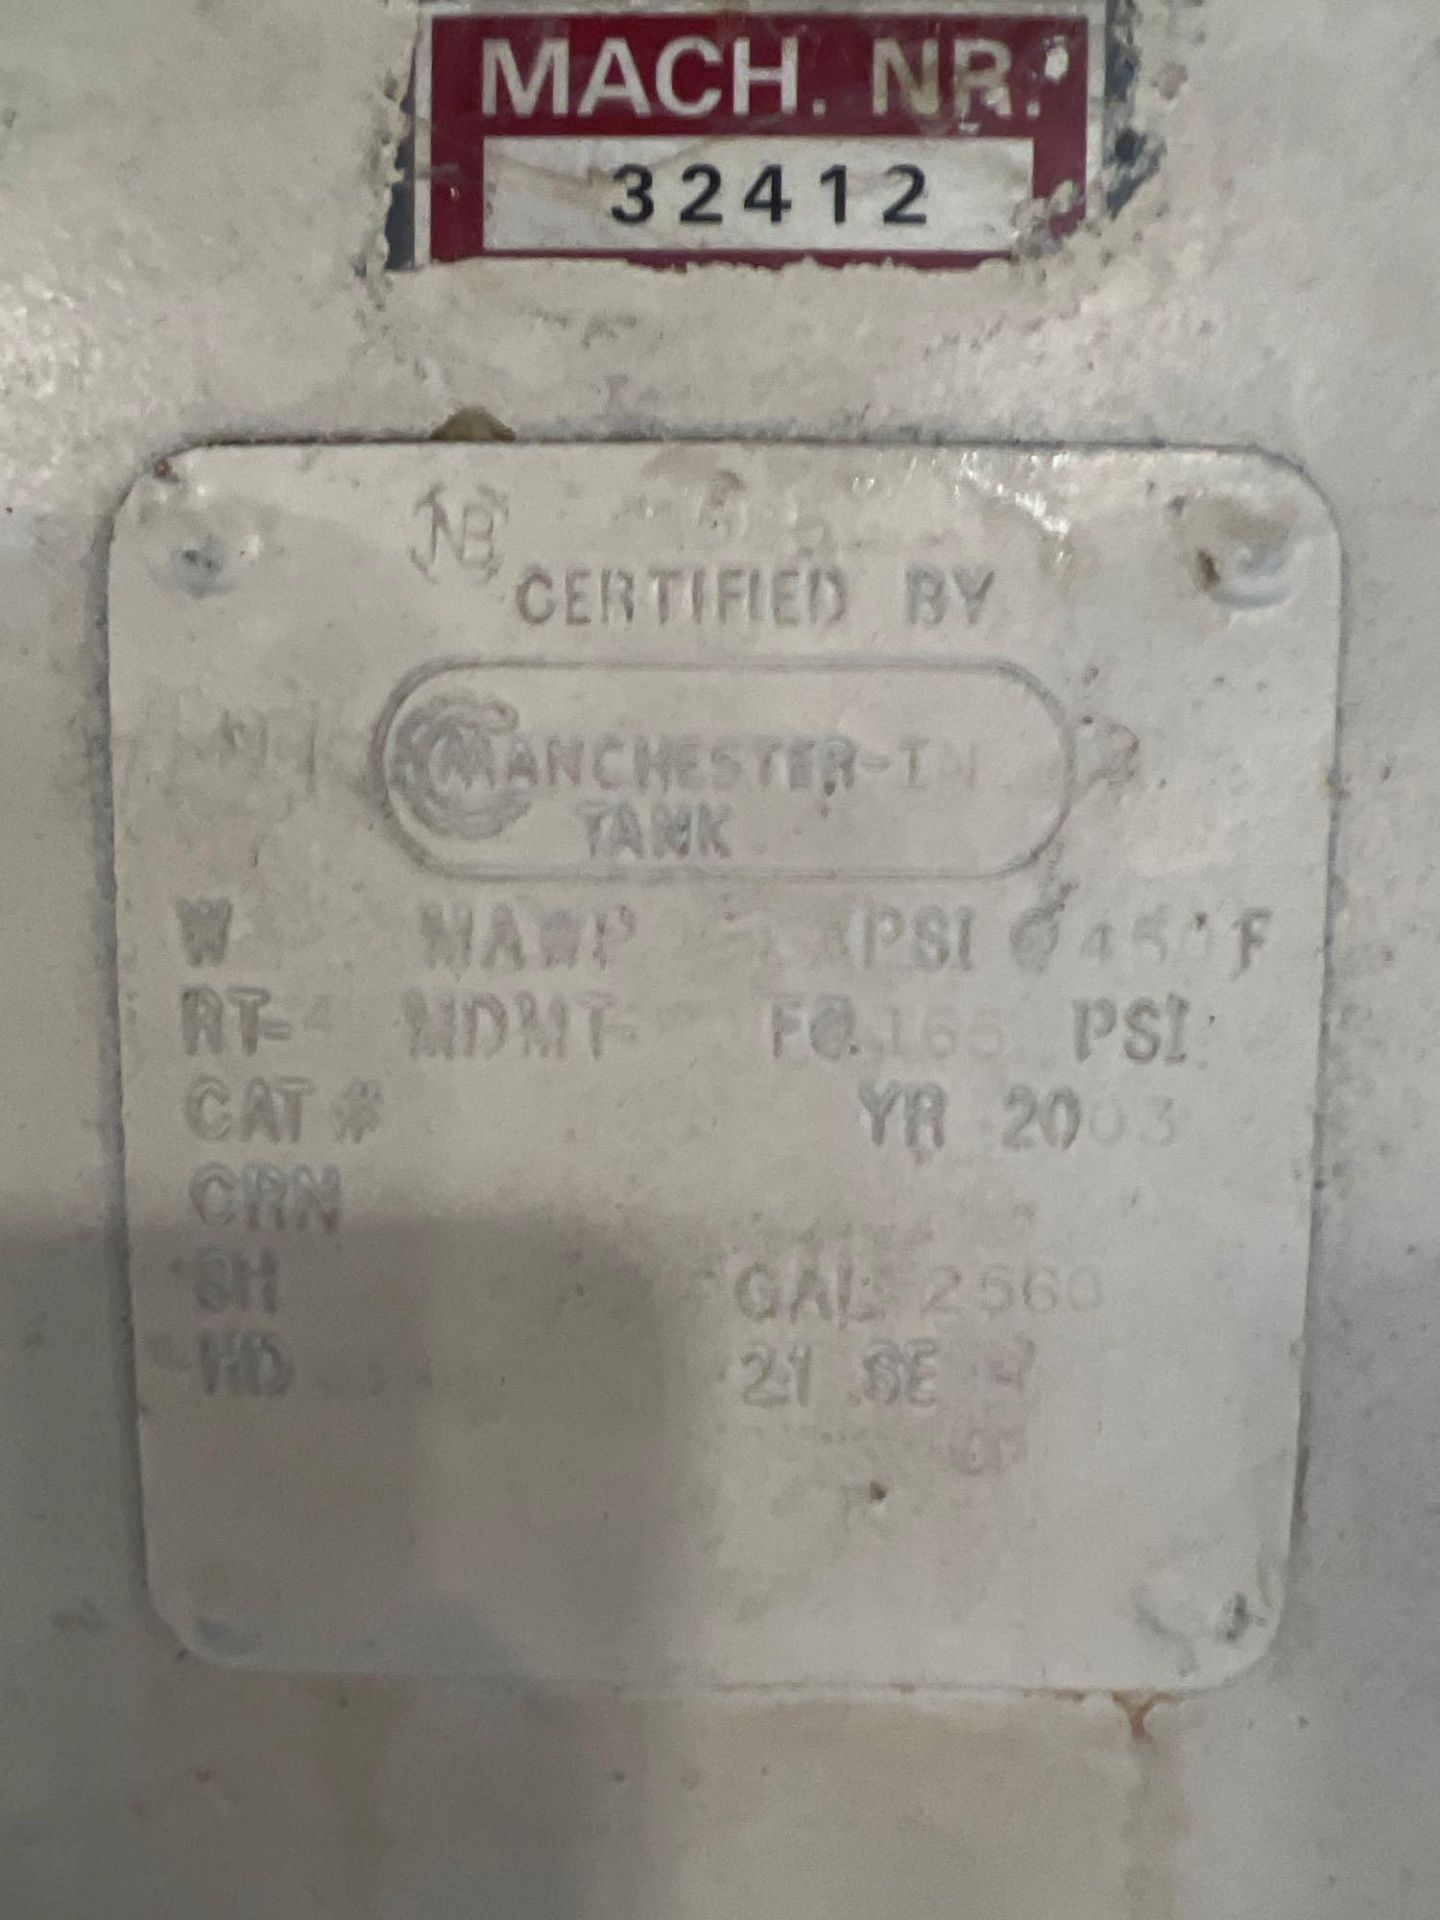 Manchester Air Tank - Image 10 of 11